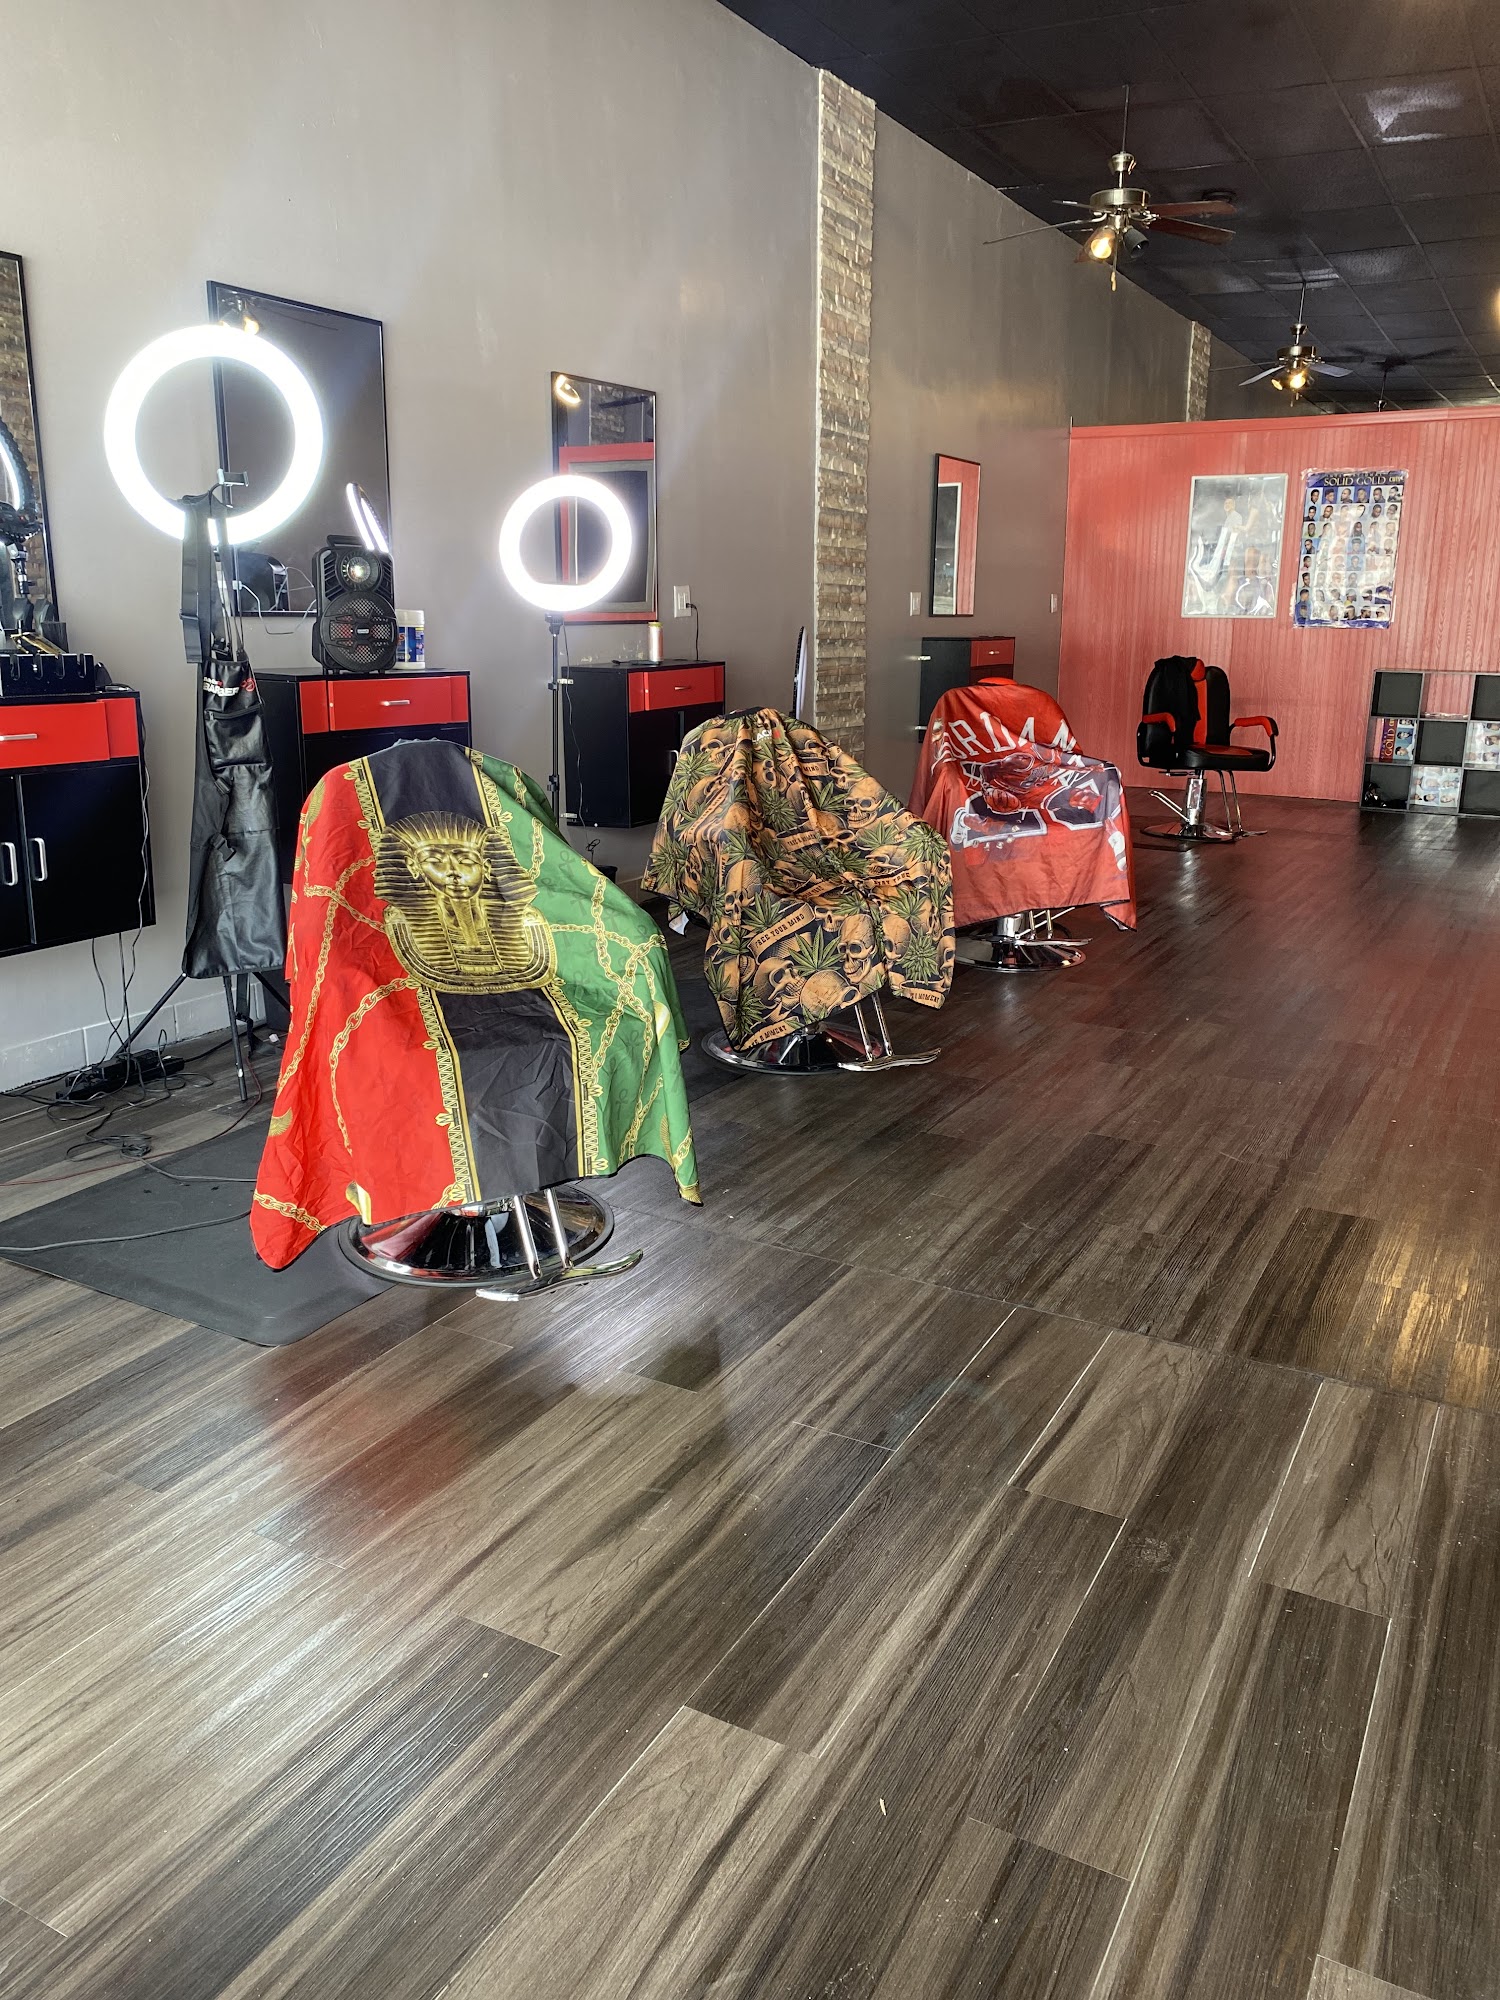 WiggsKuts Barbershop 815 W Chicago Ave, East Chicago Indiana 46312